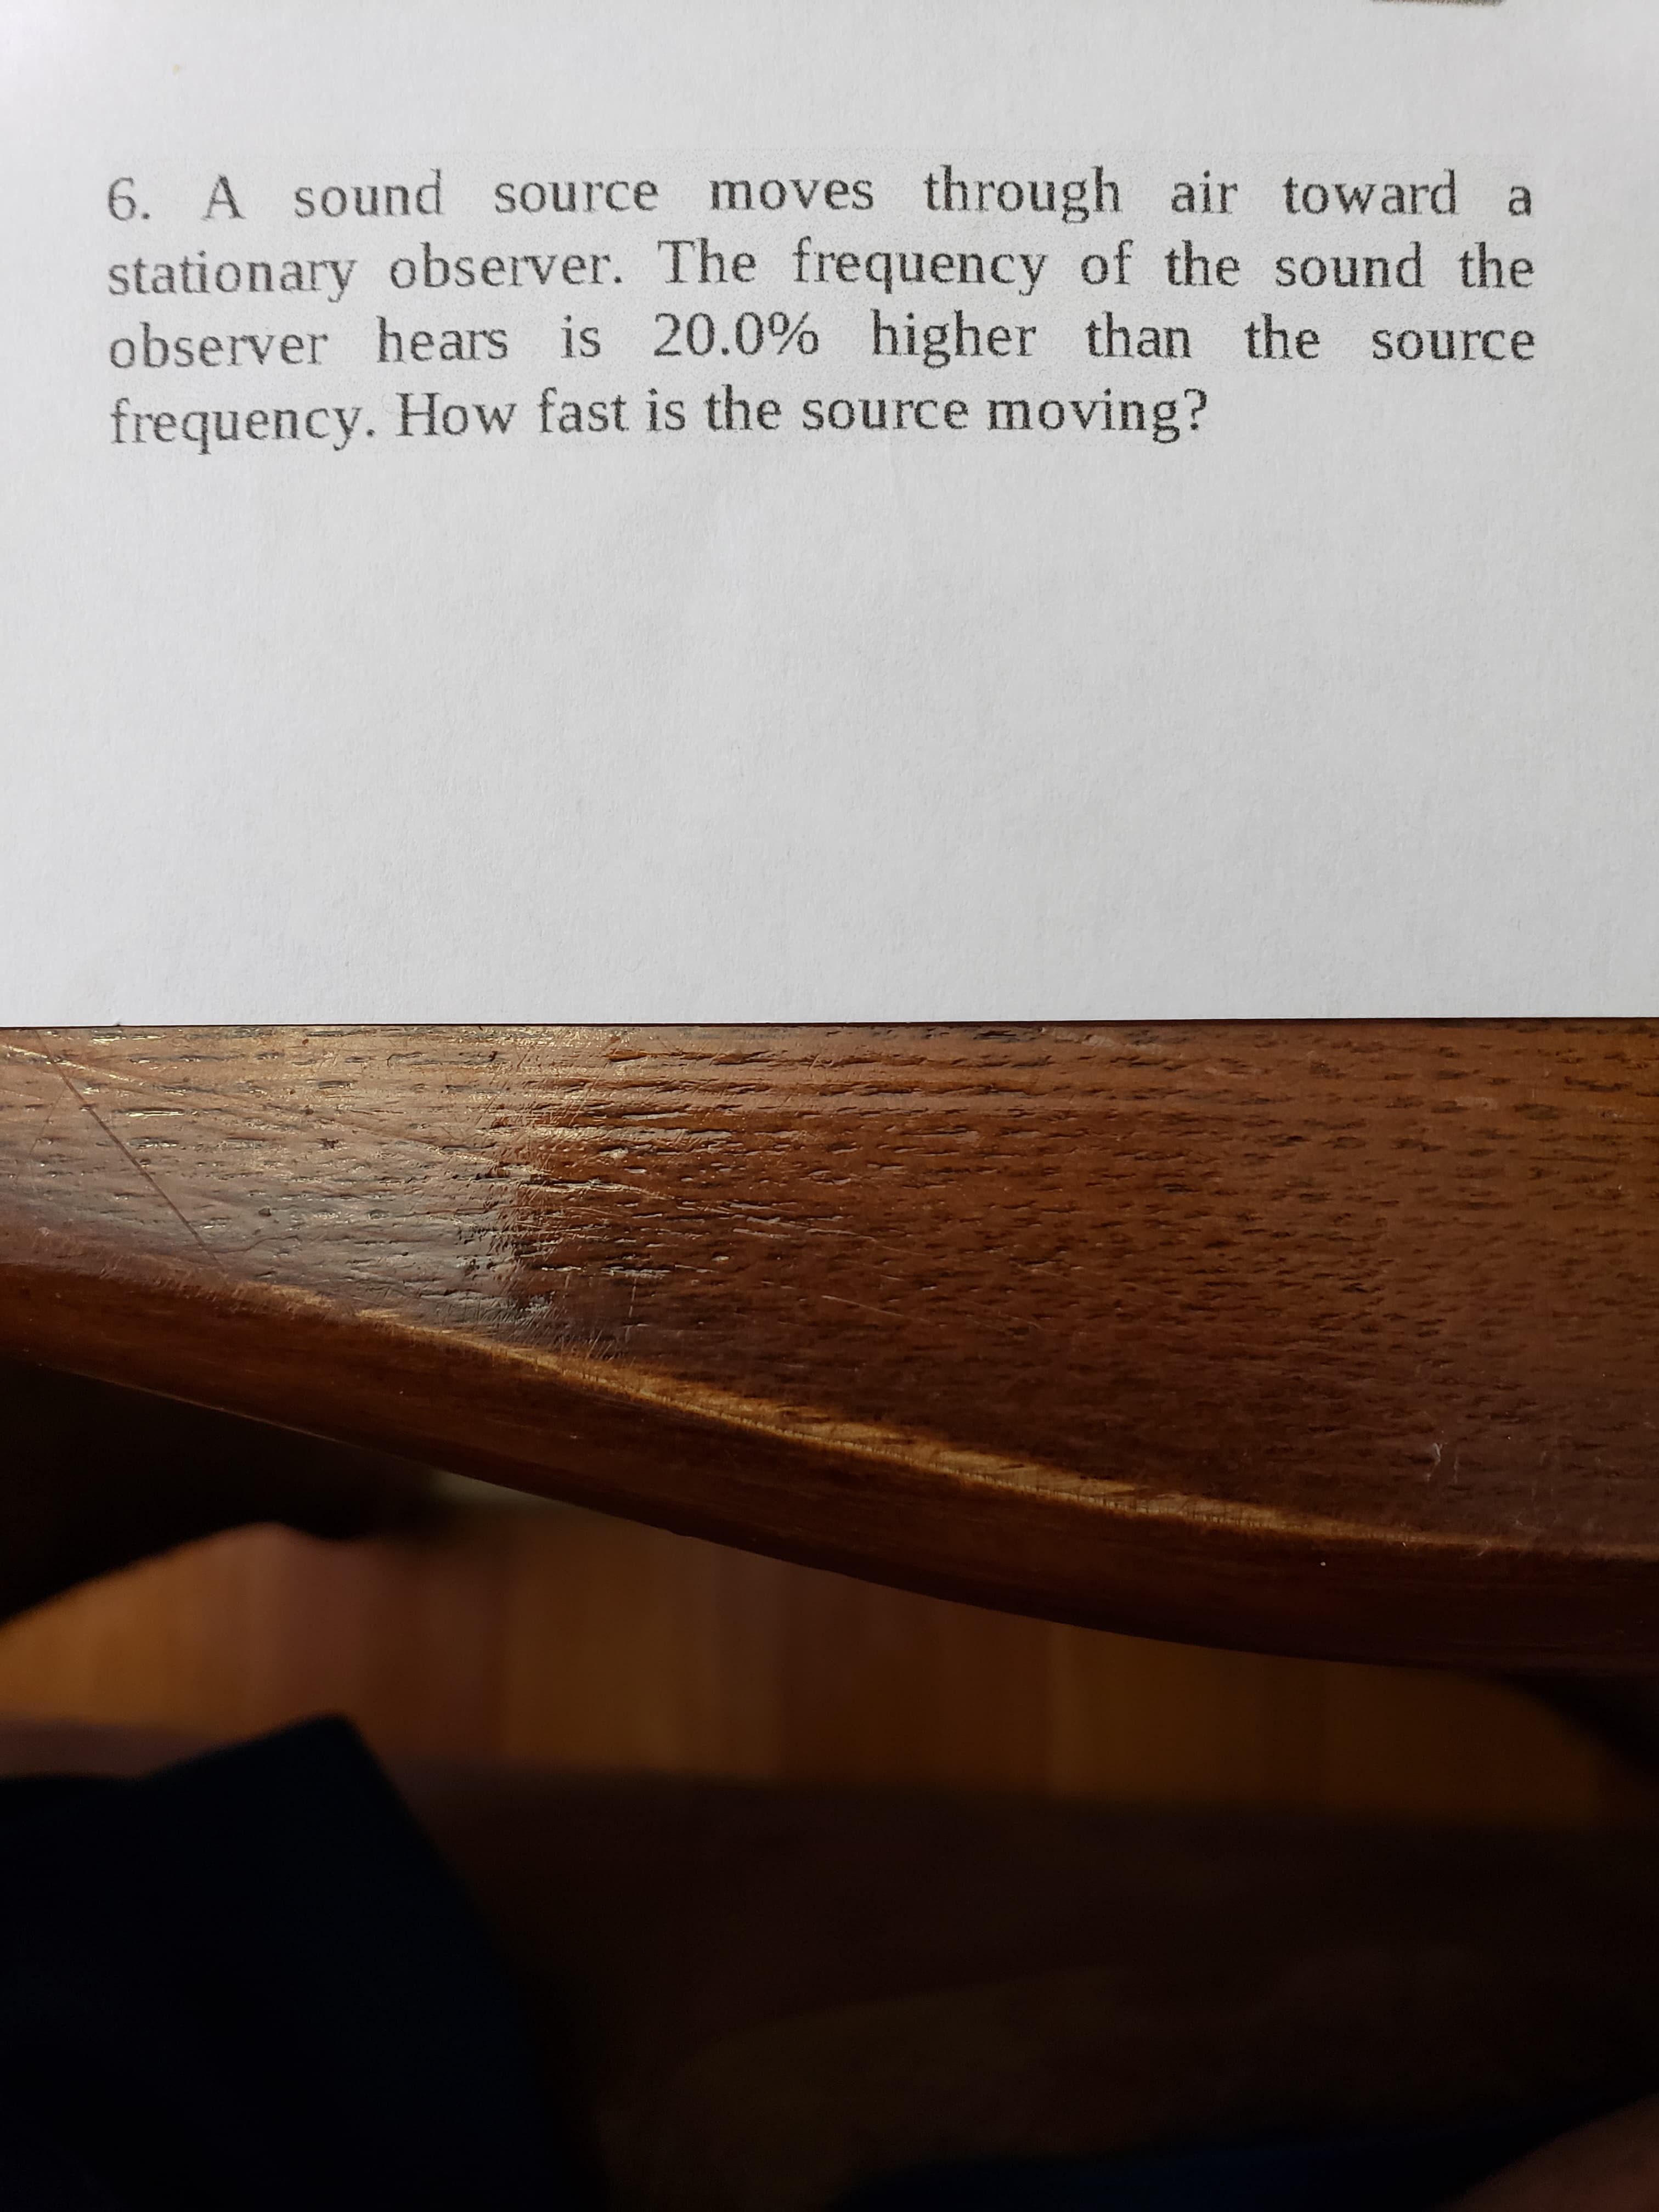 6. A sound source moves through air toward a
stationary observer. The frequency of the sound the
observer hears is 20.0% higher than the source
frequency. How fast is the source moving?
